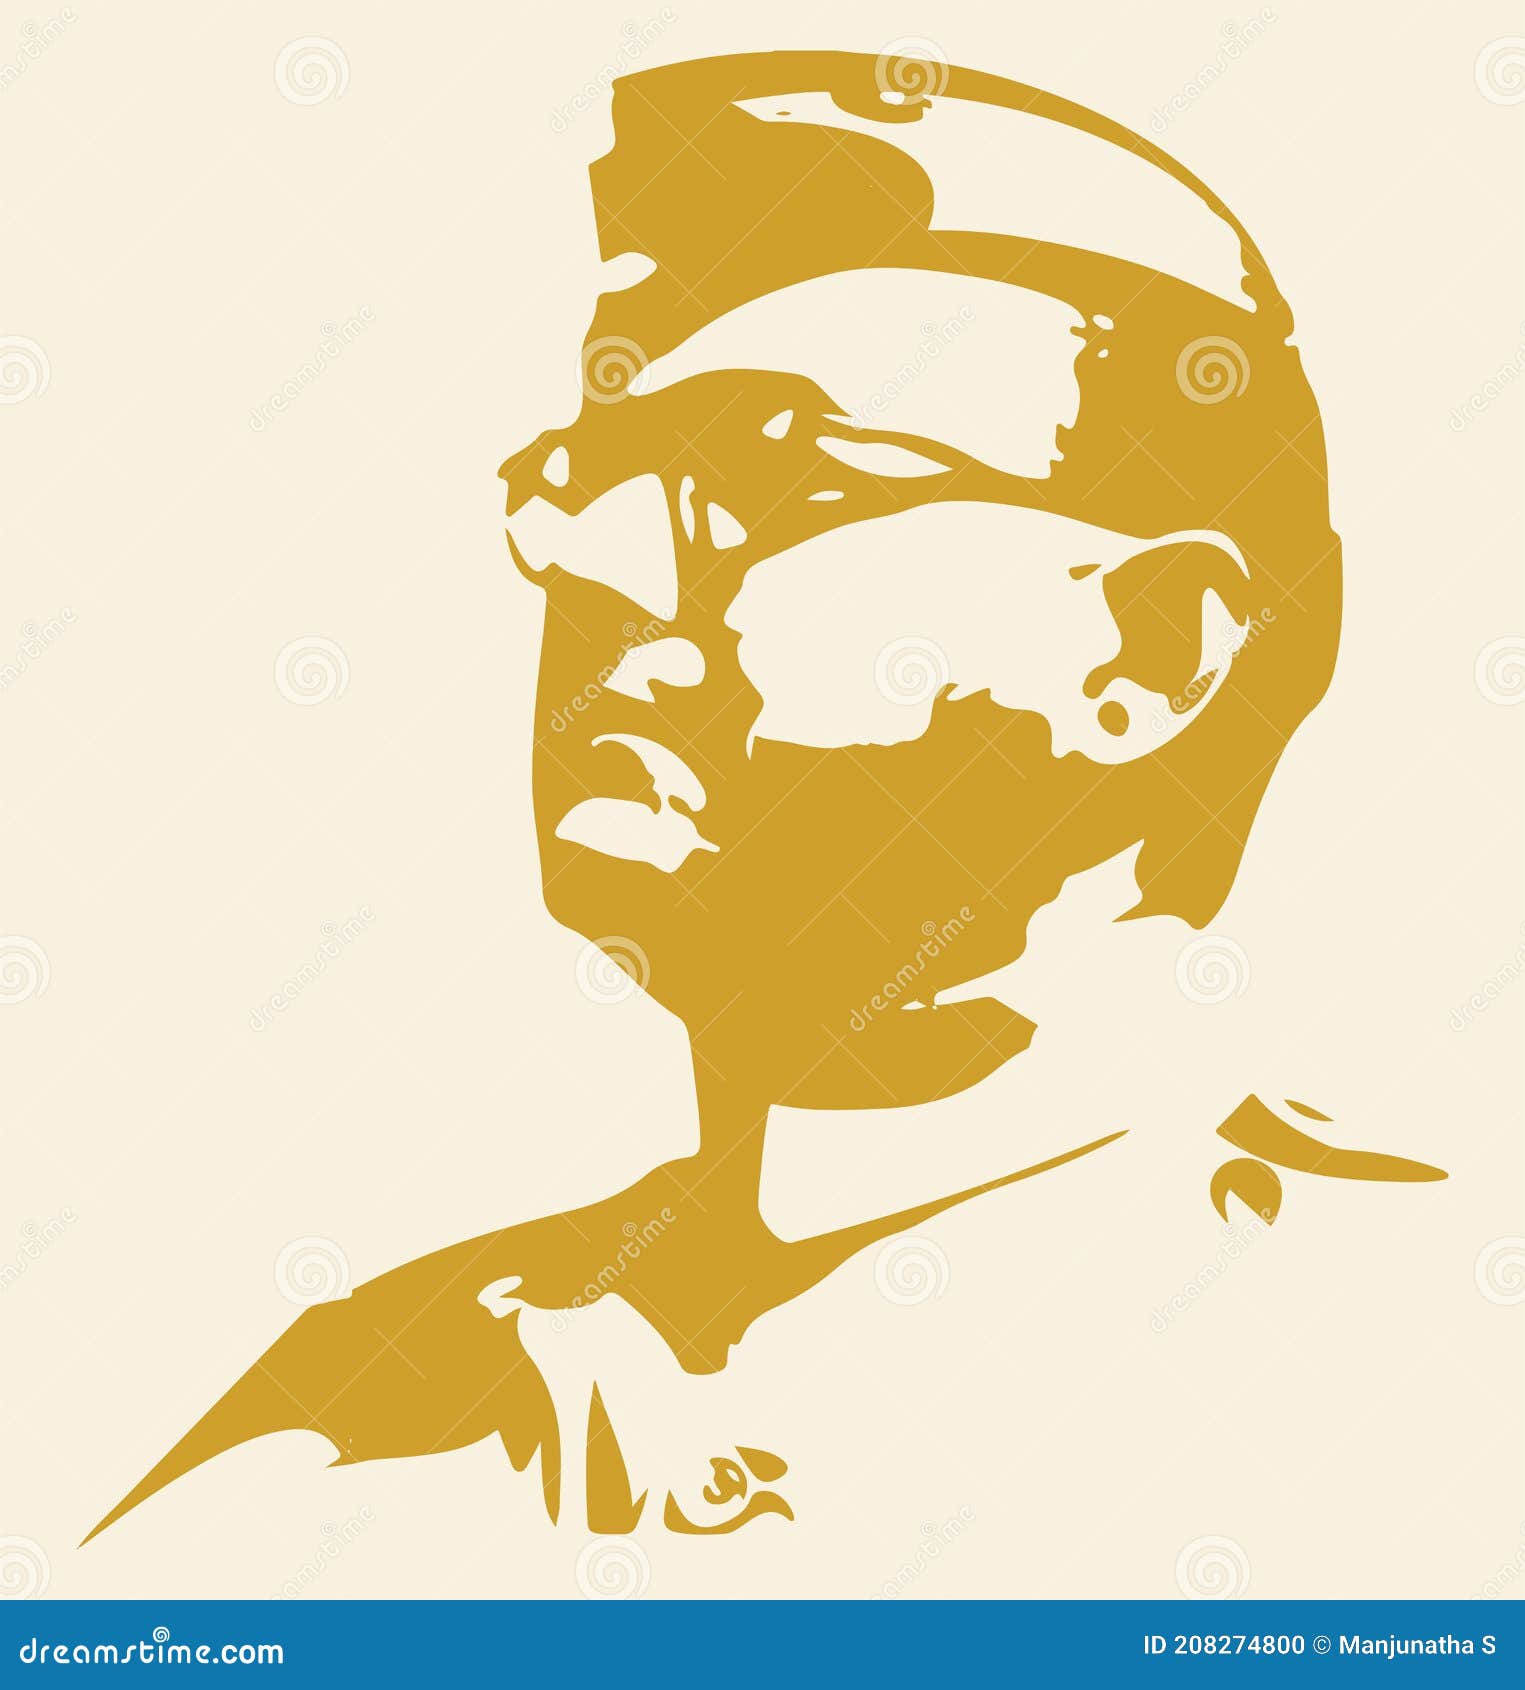 Sketch of Freedom Fighter Netaji Subhas Chandra Bose Outline Editable  Illustration Editorial Image  Illustration of government country  208274800